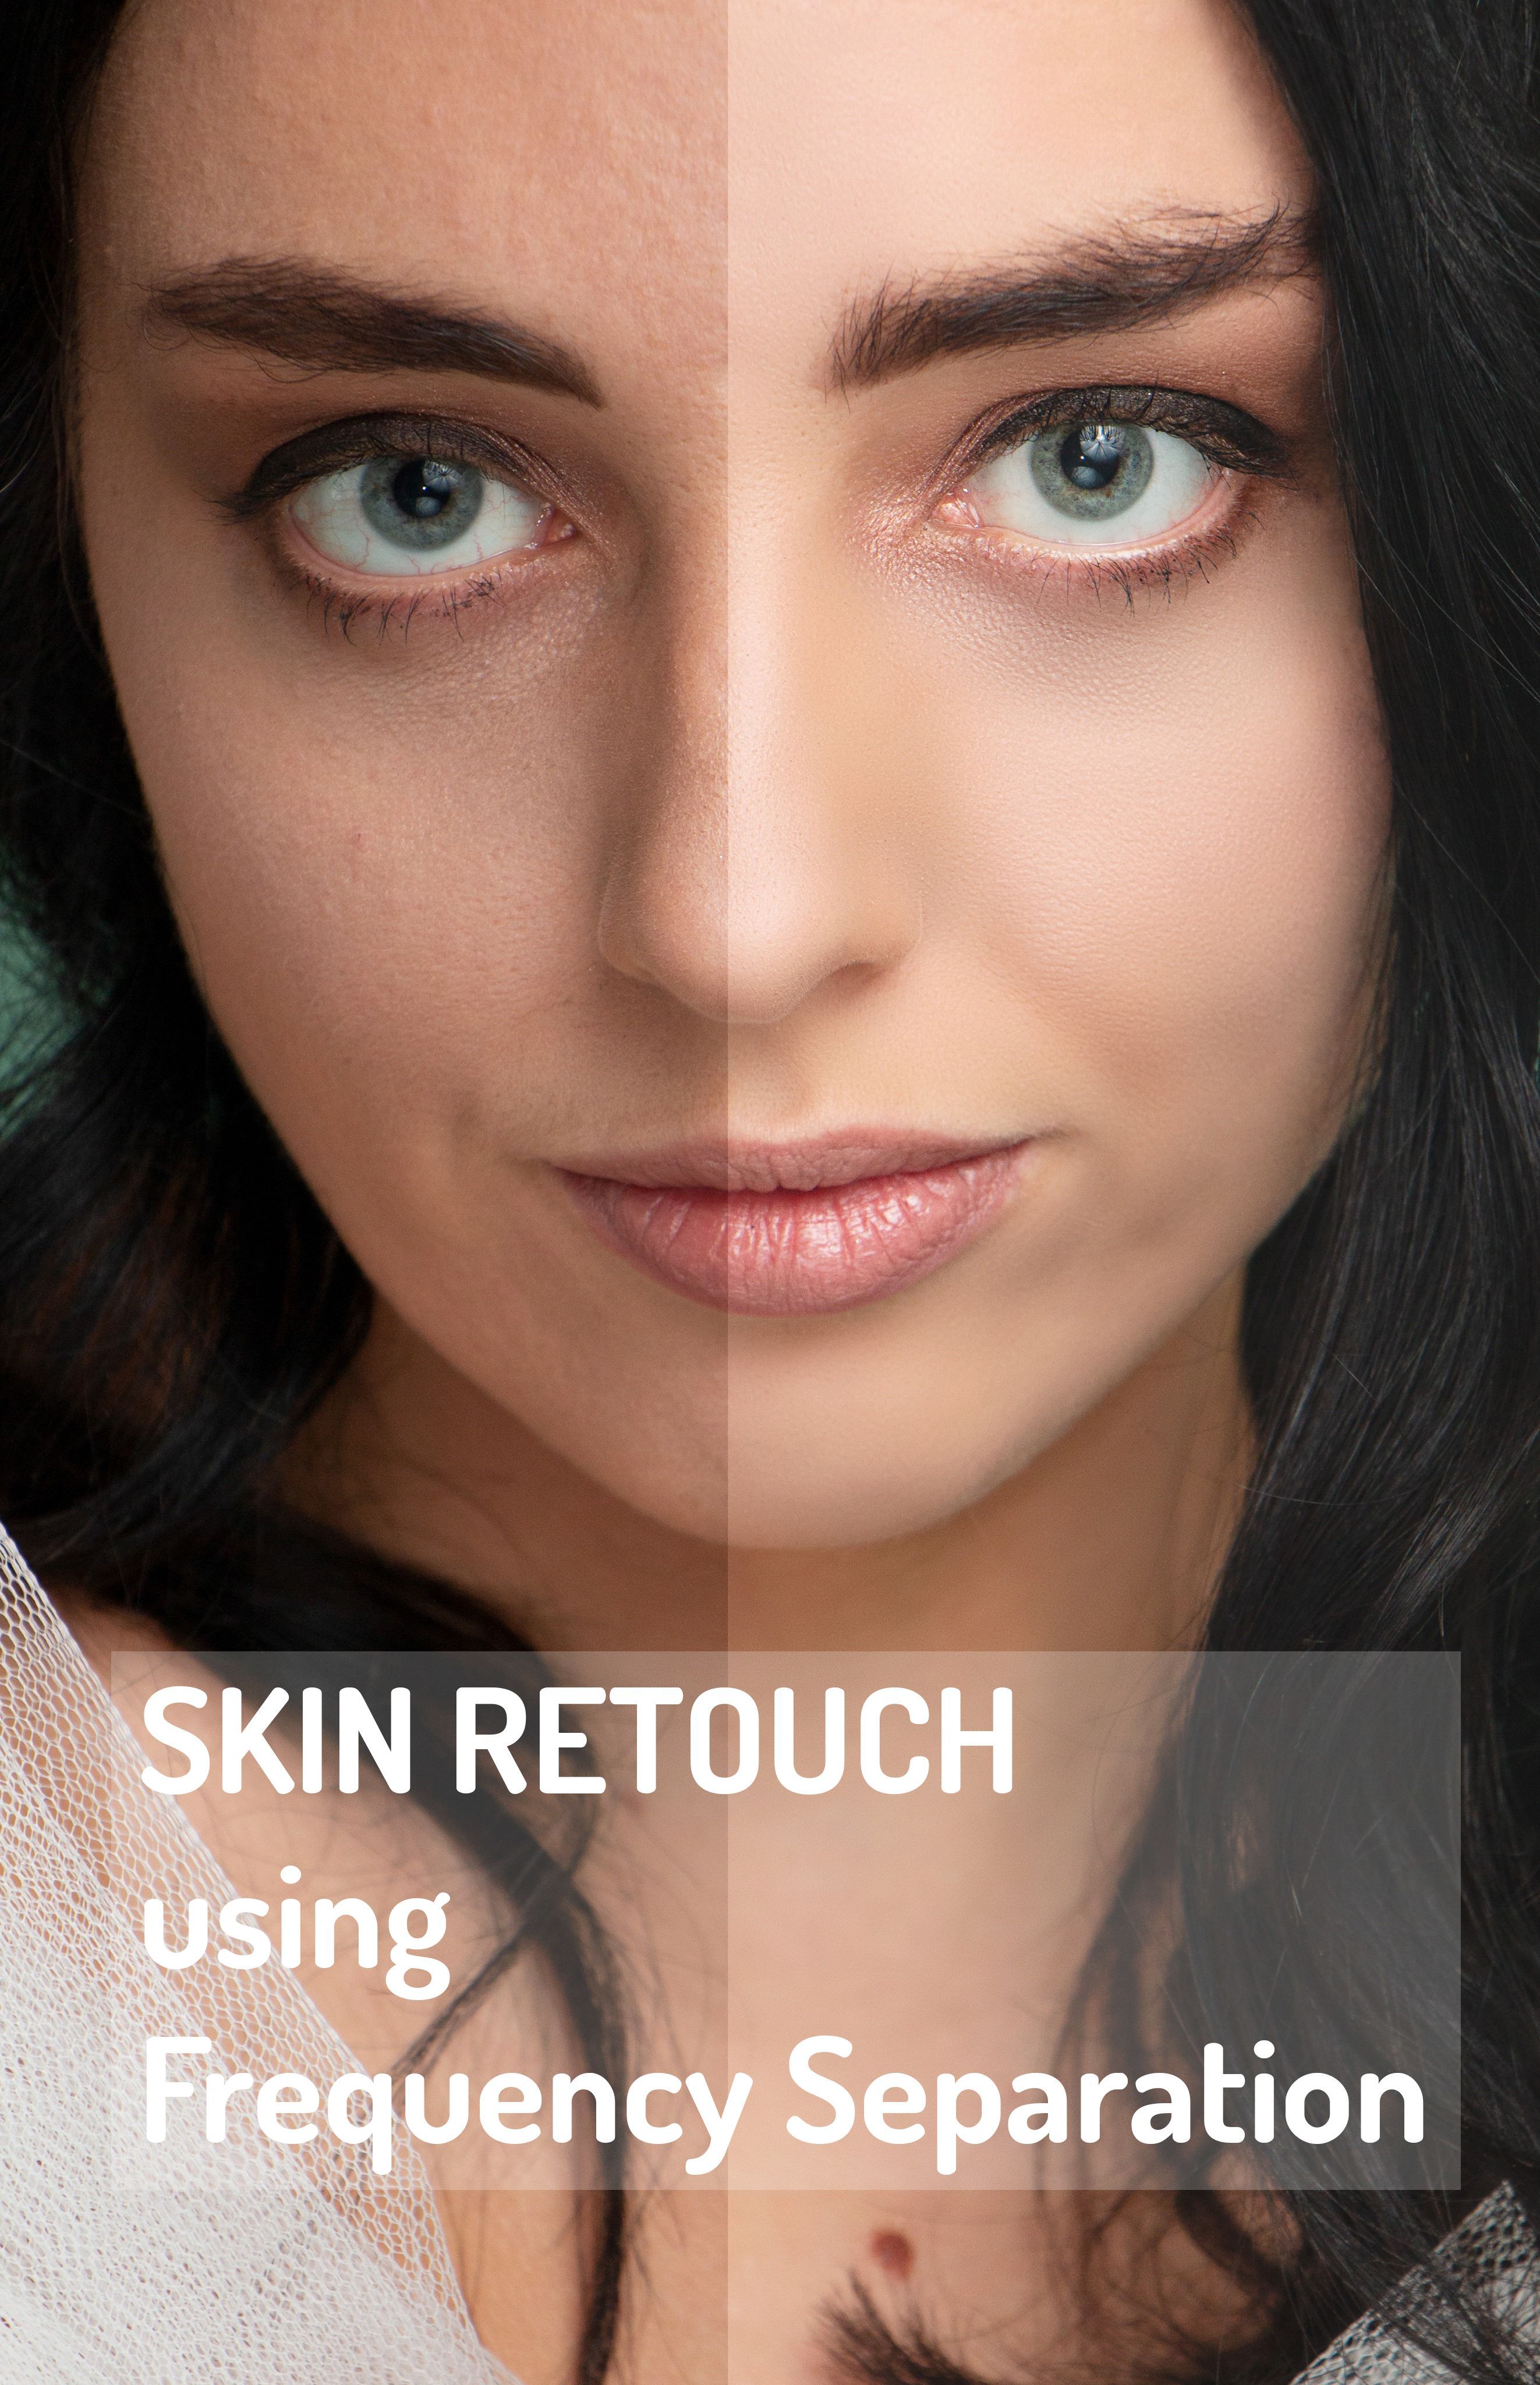 Skin Retouch Using Frequency Separation - Skin Retouch Using Frequency Separation -   20 beauty Videos photoshoot ideas